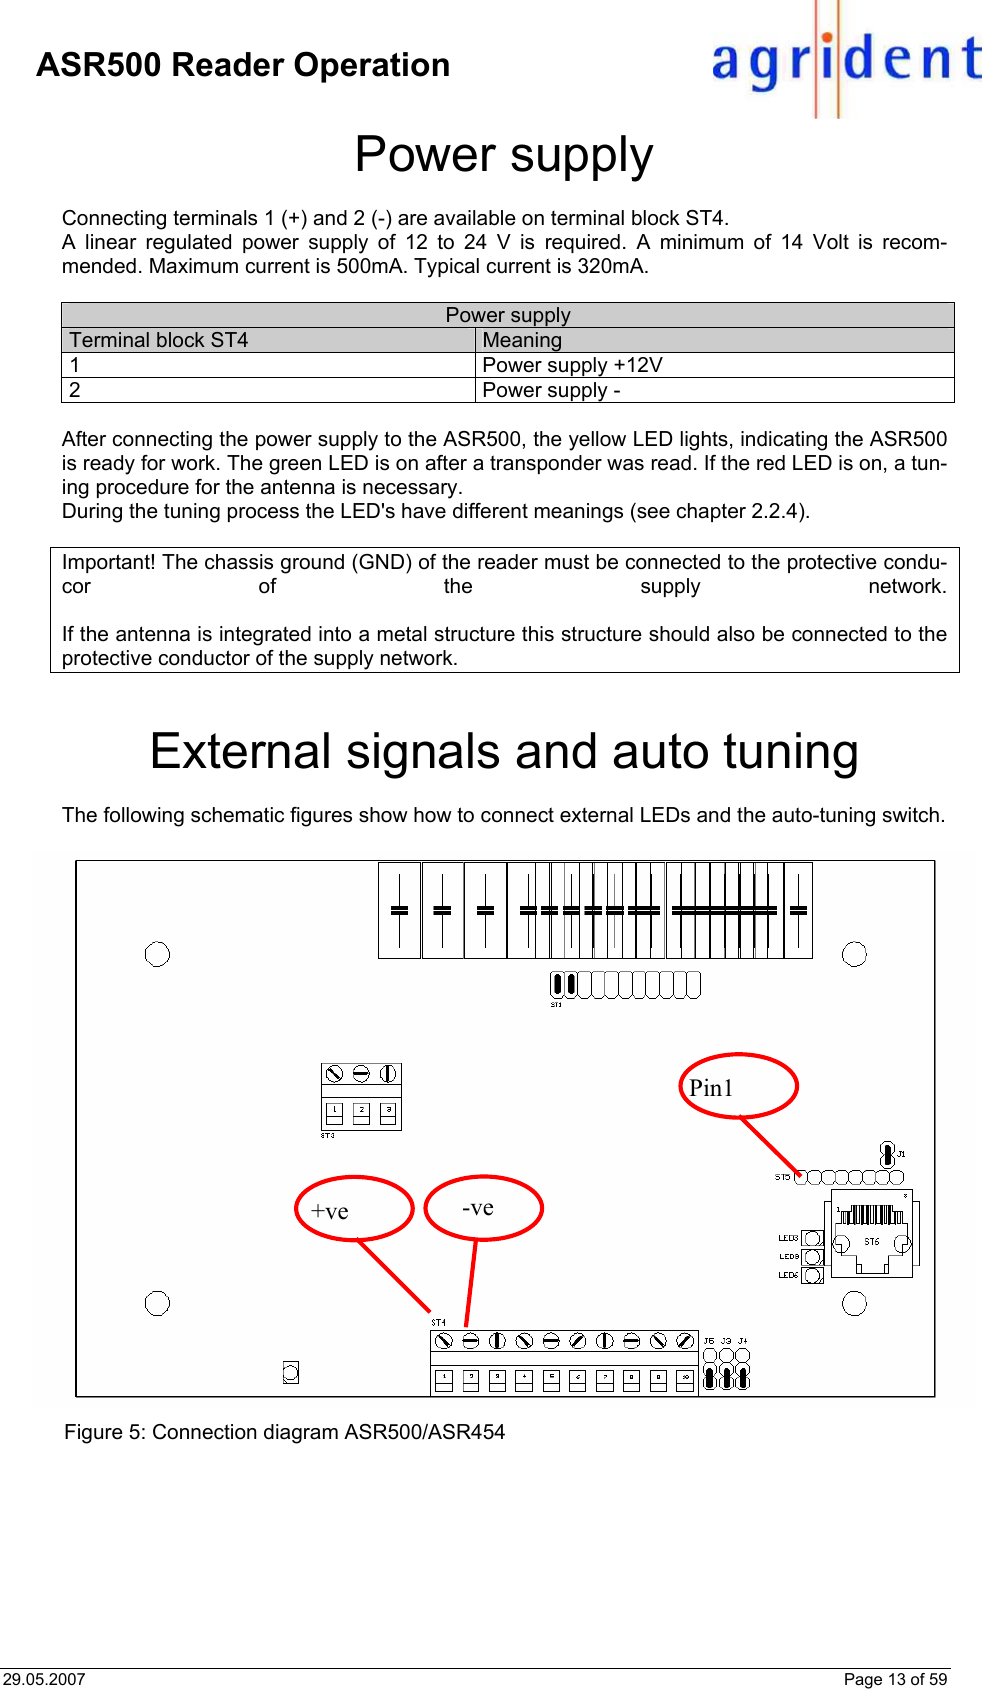 29.05.2007    Page 13 of 59     ASR500 Reader Operation Power supply  Connecting terminals 1 (+) and 2 (-) are available on terminal block ST4. A linear regulated power supply of 12 to 24 V is required. A minimum of 14 Volt is recom-mended. Maximum current is 500mA. Typical current is 320mA.  Power supply Terminal block ST4  Meaning 1  Power supply +12V 2  Power supply -  After connecting the power supply to the ASR500, the yellow LED lights, indicating the ASR500 is ready for work. The green LED is on after a transponder was read. If the red LED is on, a tun-ing procedure for the antenna is necessary. During the tuning process the LED&apos;s have different meanings (see chapter 2.2.4).  Important! The chassis ground (GND) of the reader must be connected to the protective condu-cor of the supply network.   If the antenna is integrated into a metal structure this structure should also be connected to the protective conductor of the supply network.     External signals and auto tuning  The following schematic figures show how to connect external LEDs and the auto-tuning switch.   Figure 5: Connection diagram ASR500/ASR454  -ve +ve Pin1 